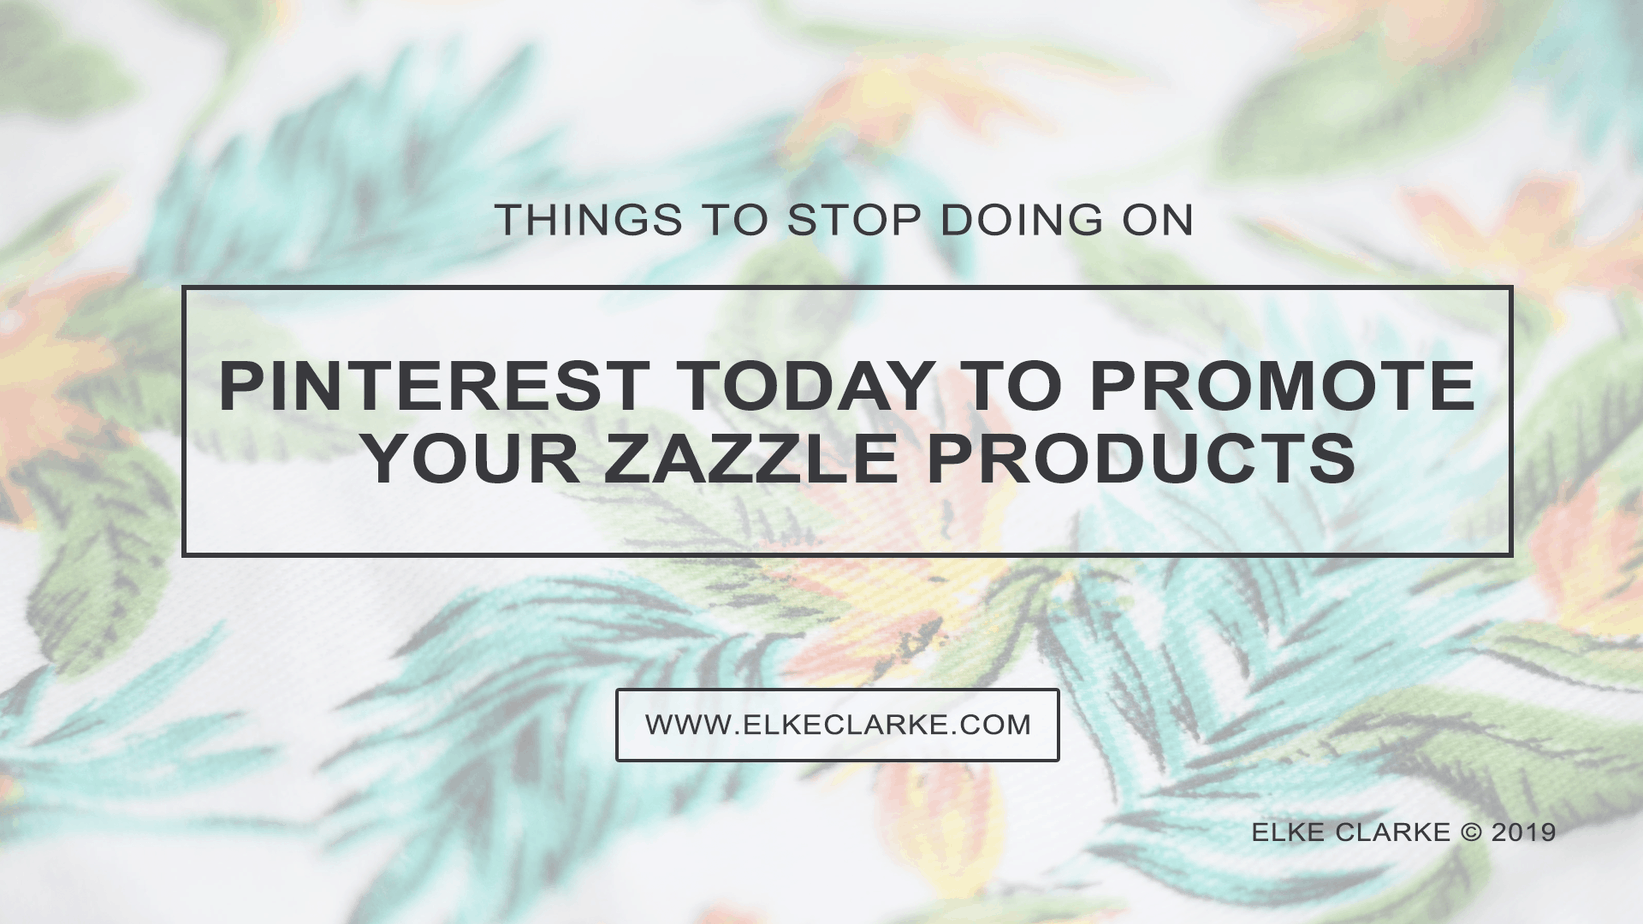 Elke Clarke | Things to Stop Doing Today on Pinterest to Promote Your Zazzle Products